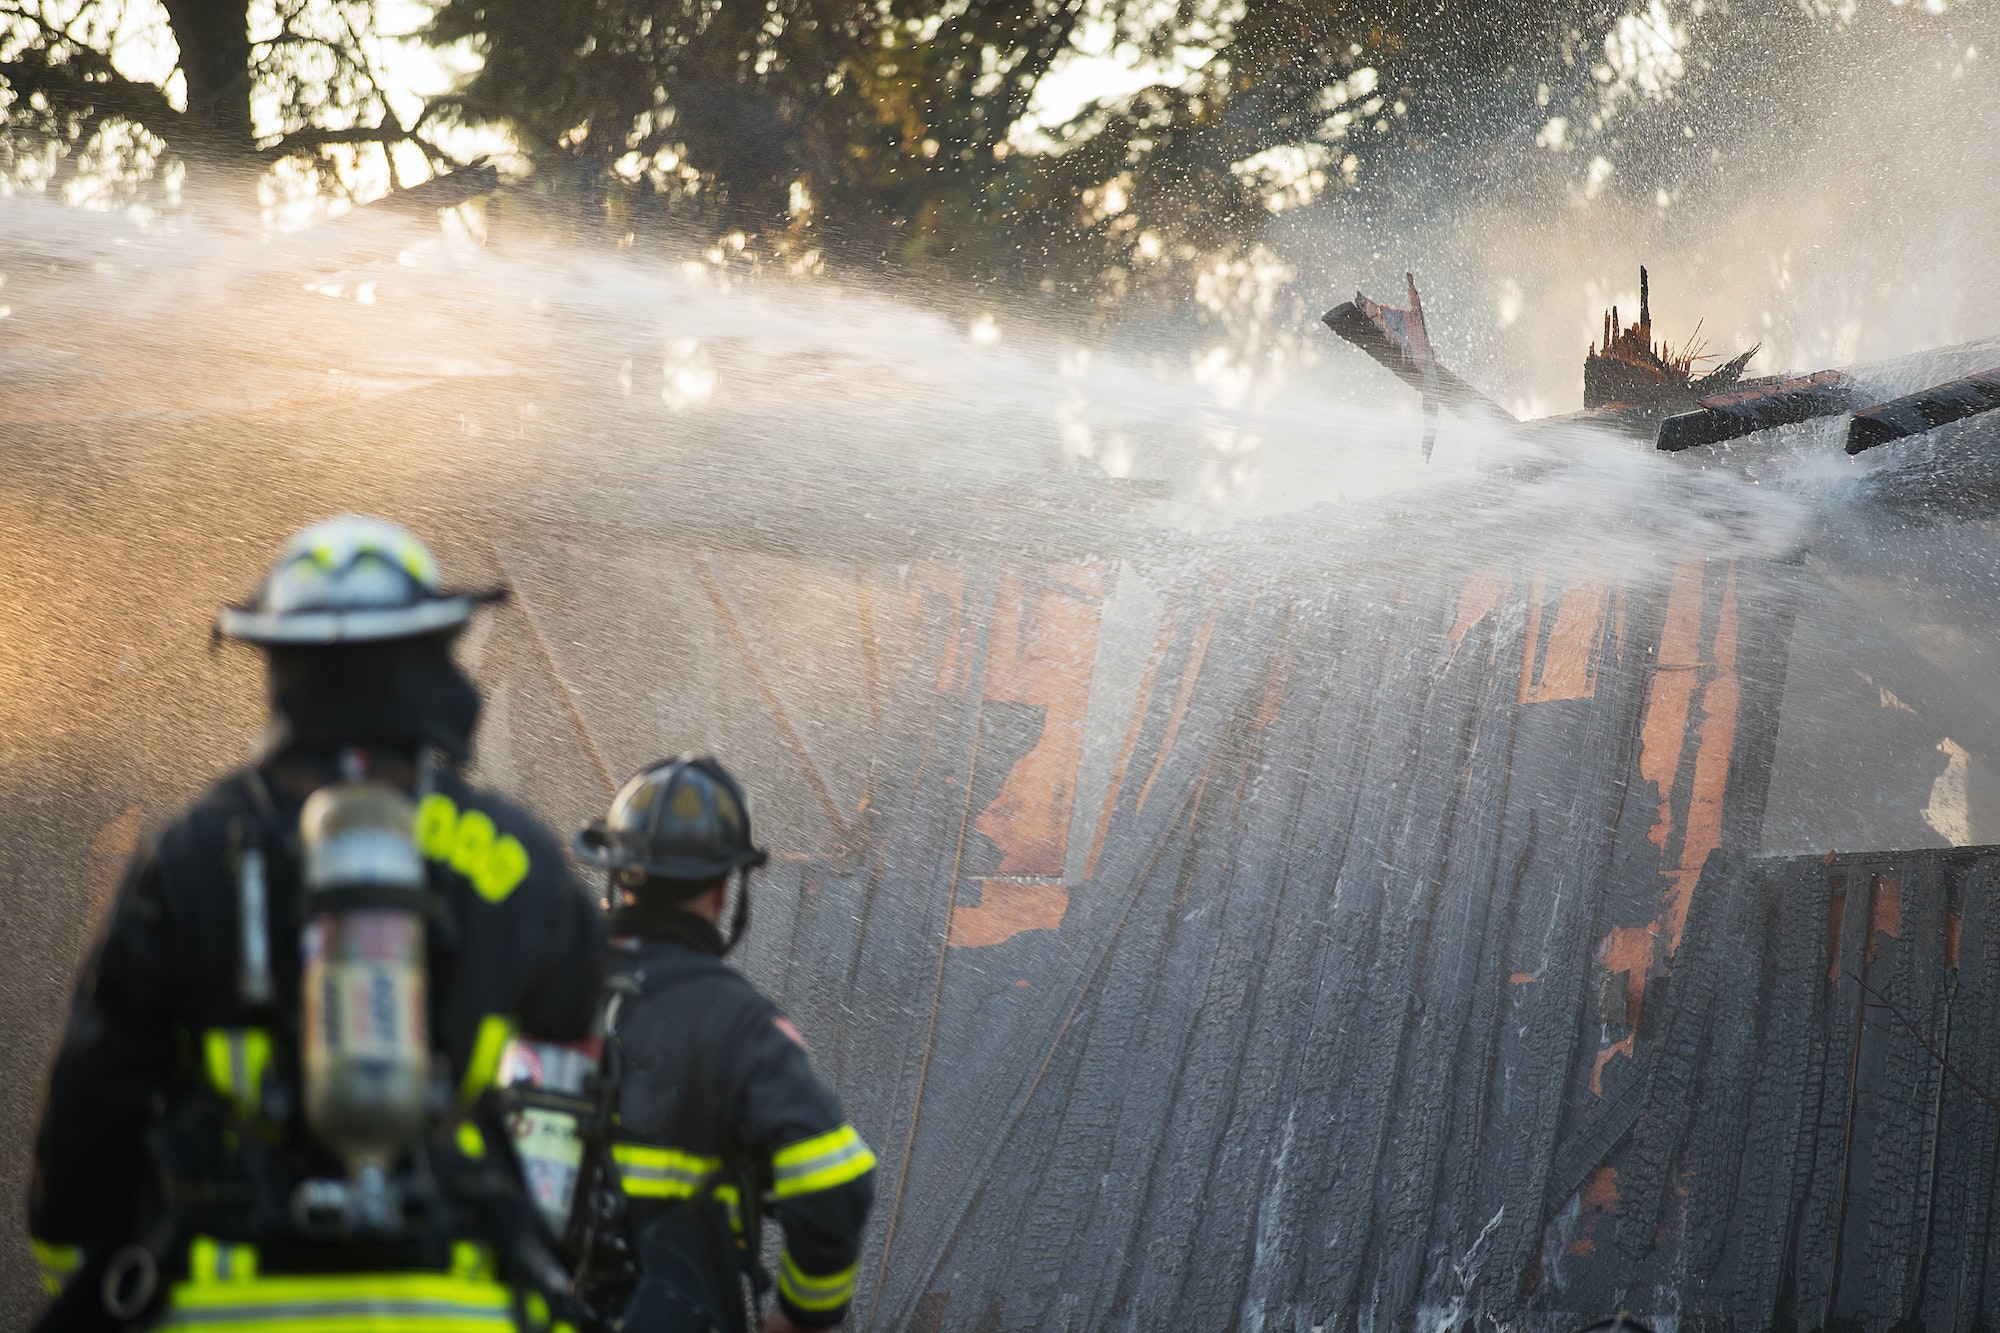 Firefighter sprays water on burning house fire